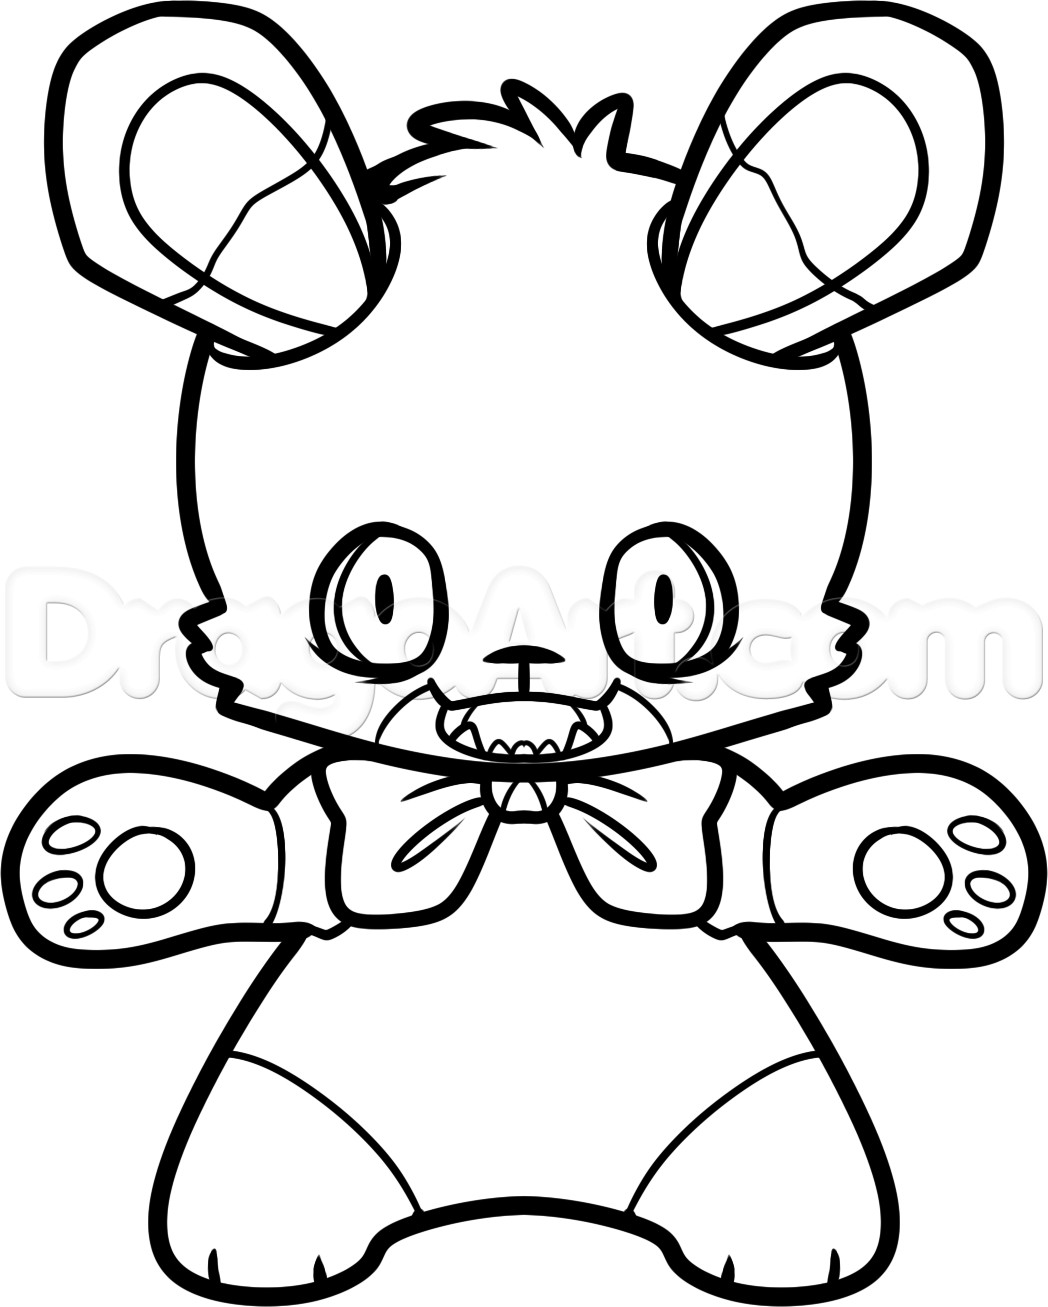 Fnaf Coloring Pages For Boys
 how to draw bonnie from five nights at freddys step 9